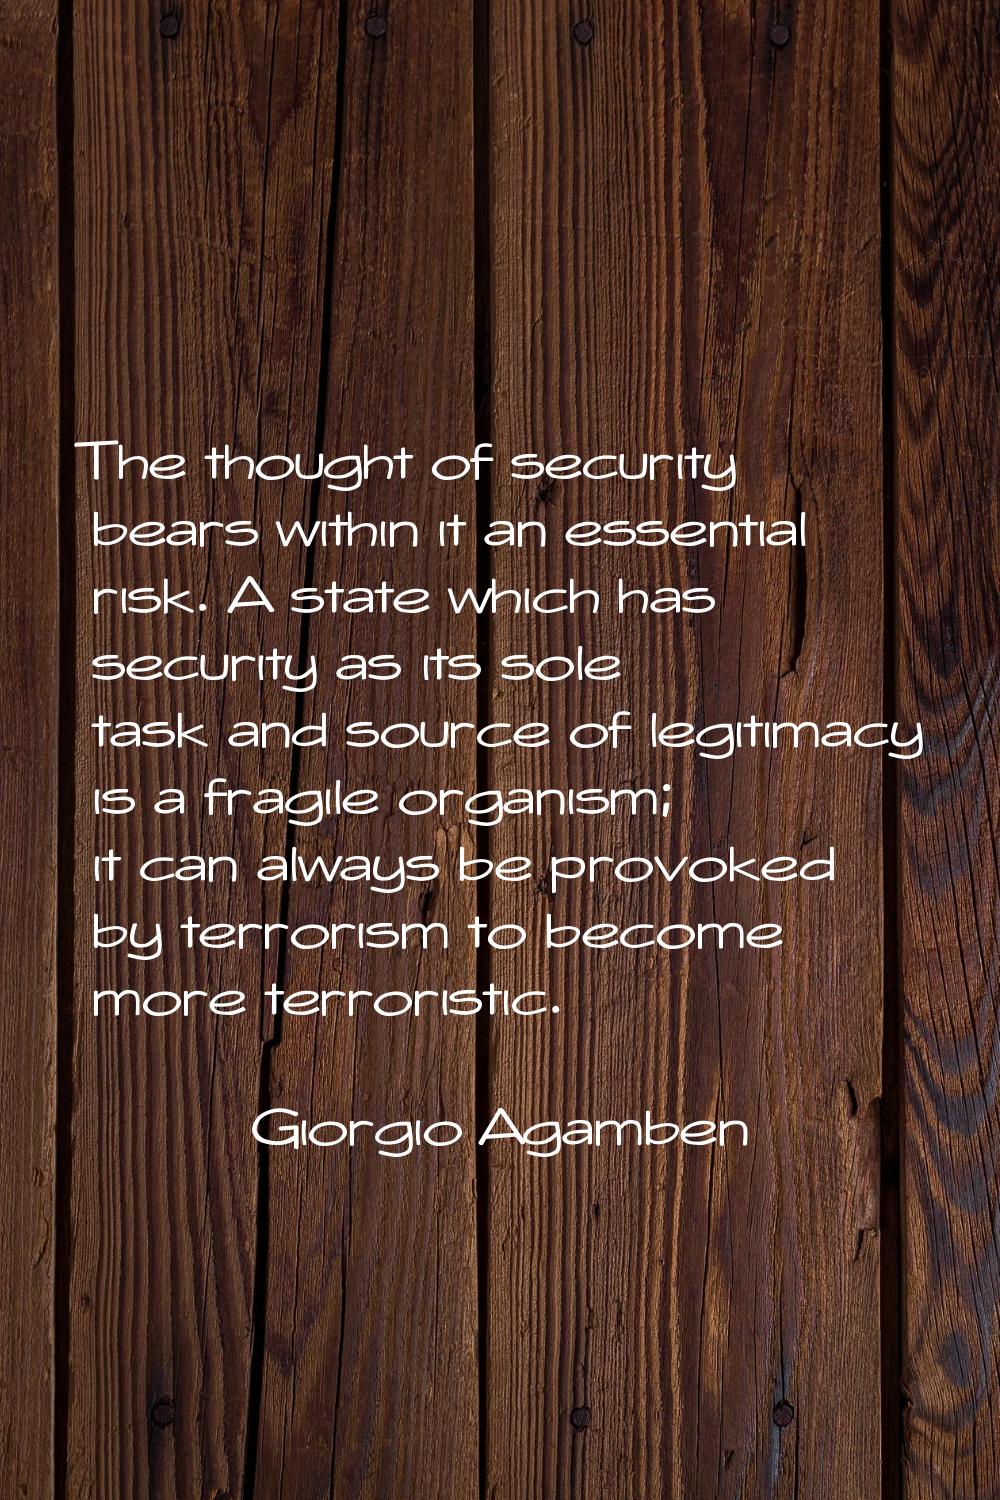 The thought of security bears within it an essential risk. A state which has security as its sole t